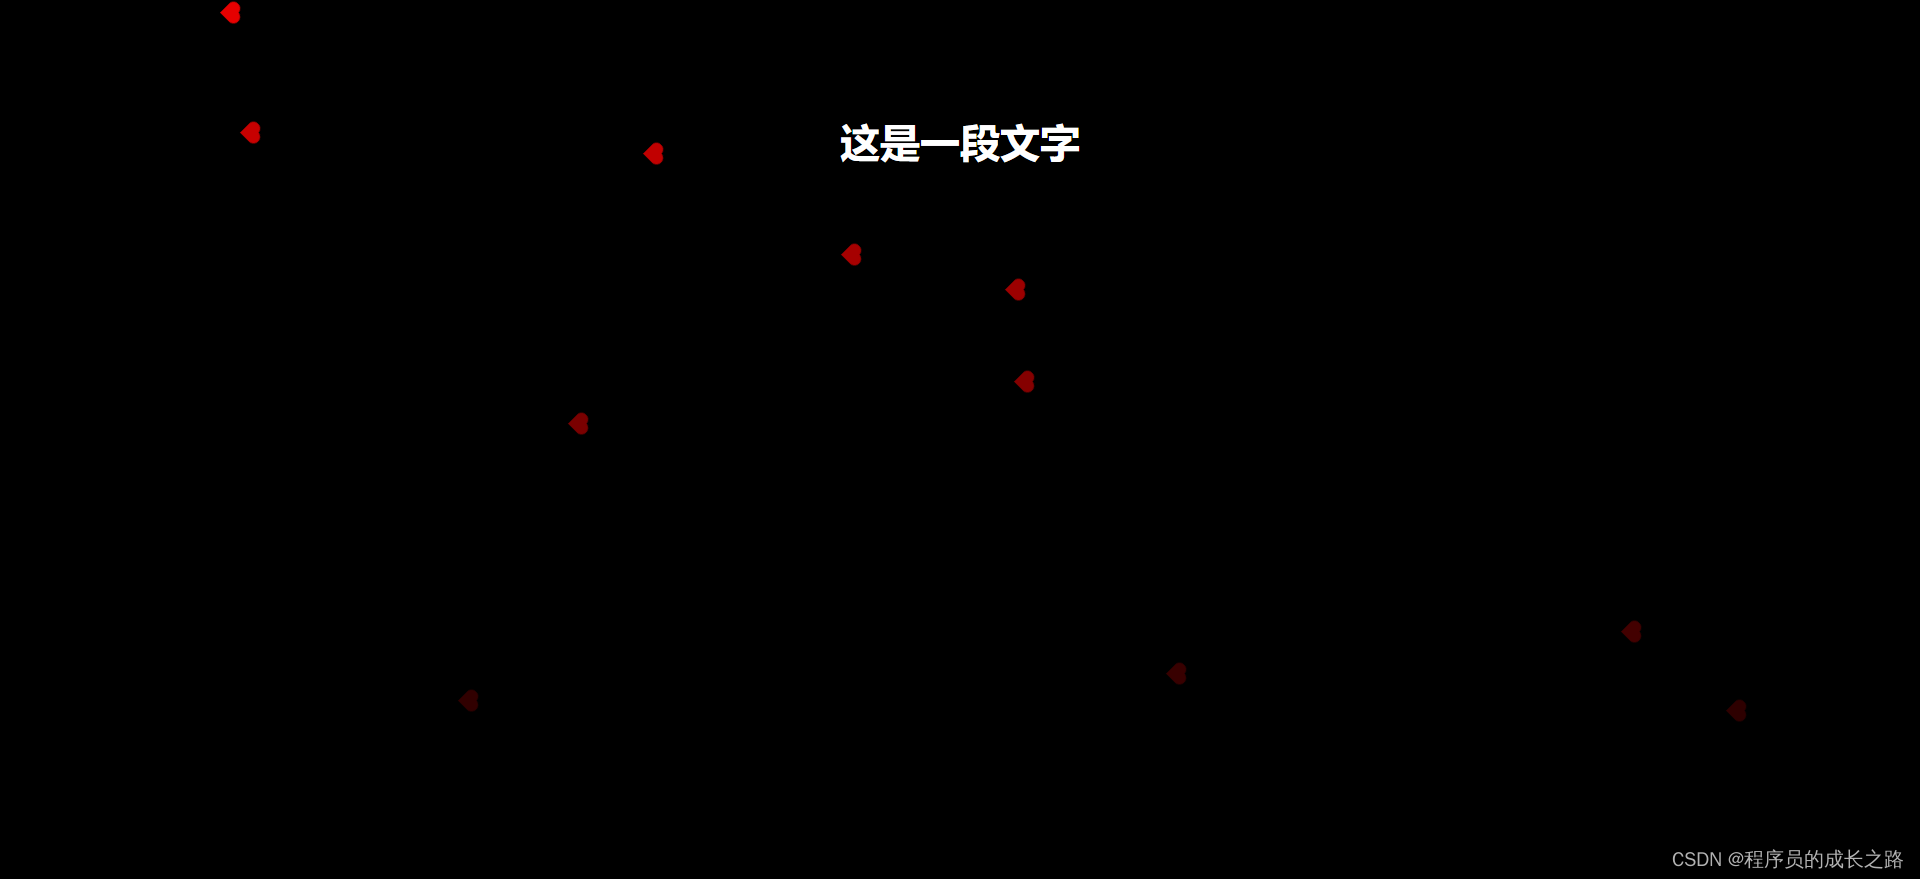 <span style='color:red;'>用</span> <span style='color:red;'>HTML</span>＋CSS <span style='color:red;'>实现</span>全屏爱心滴落的动画效果，中间可<span style='color:red;'>显示</span>名字